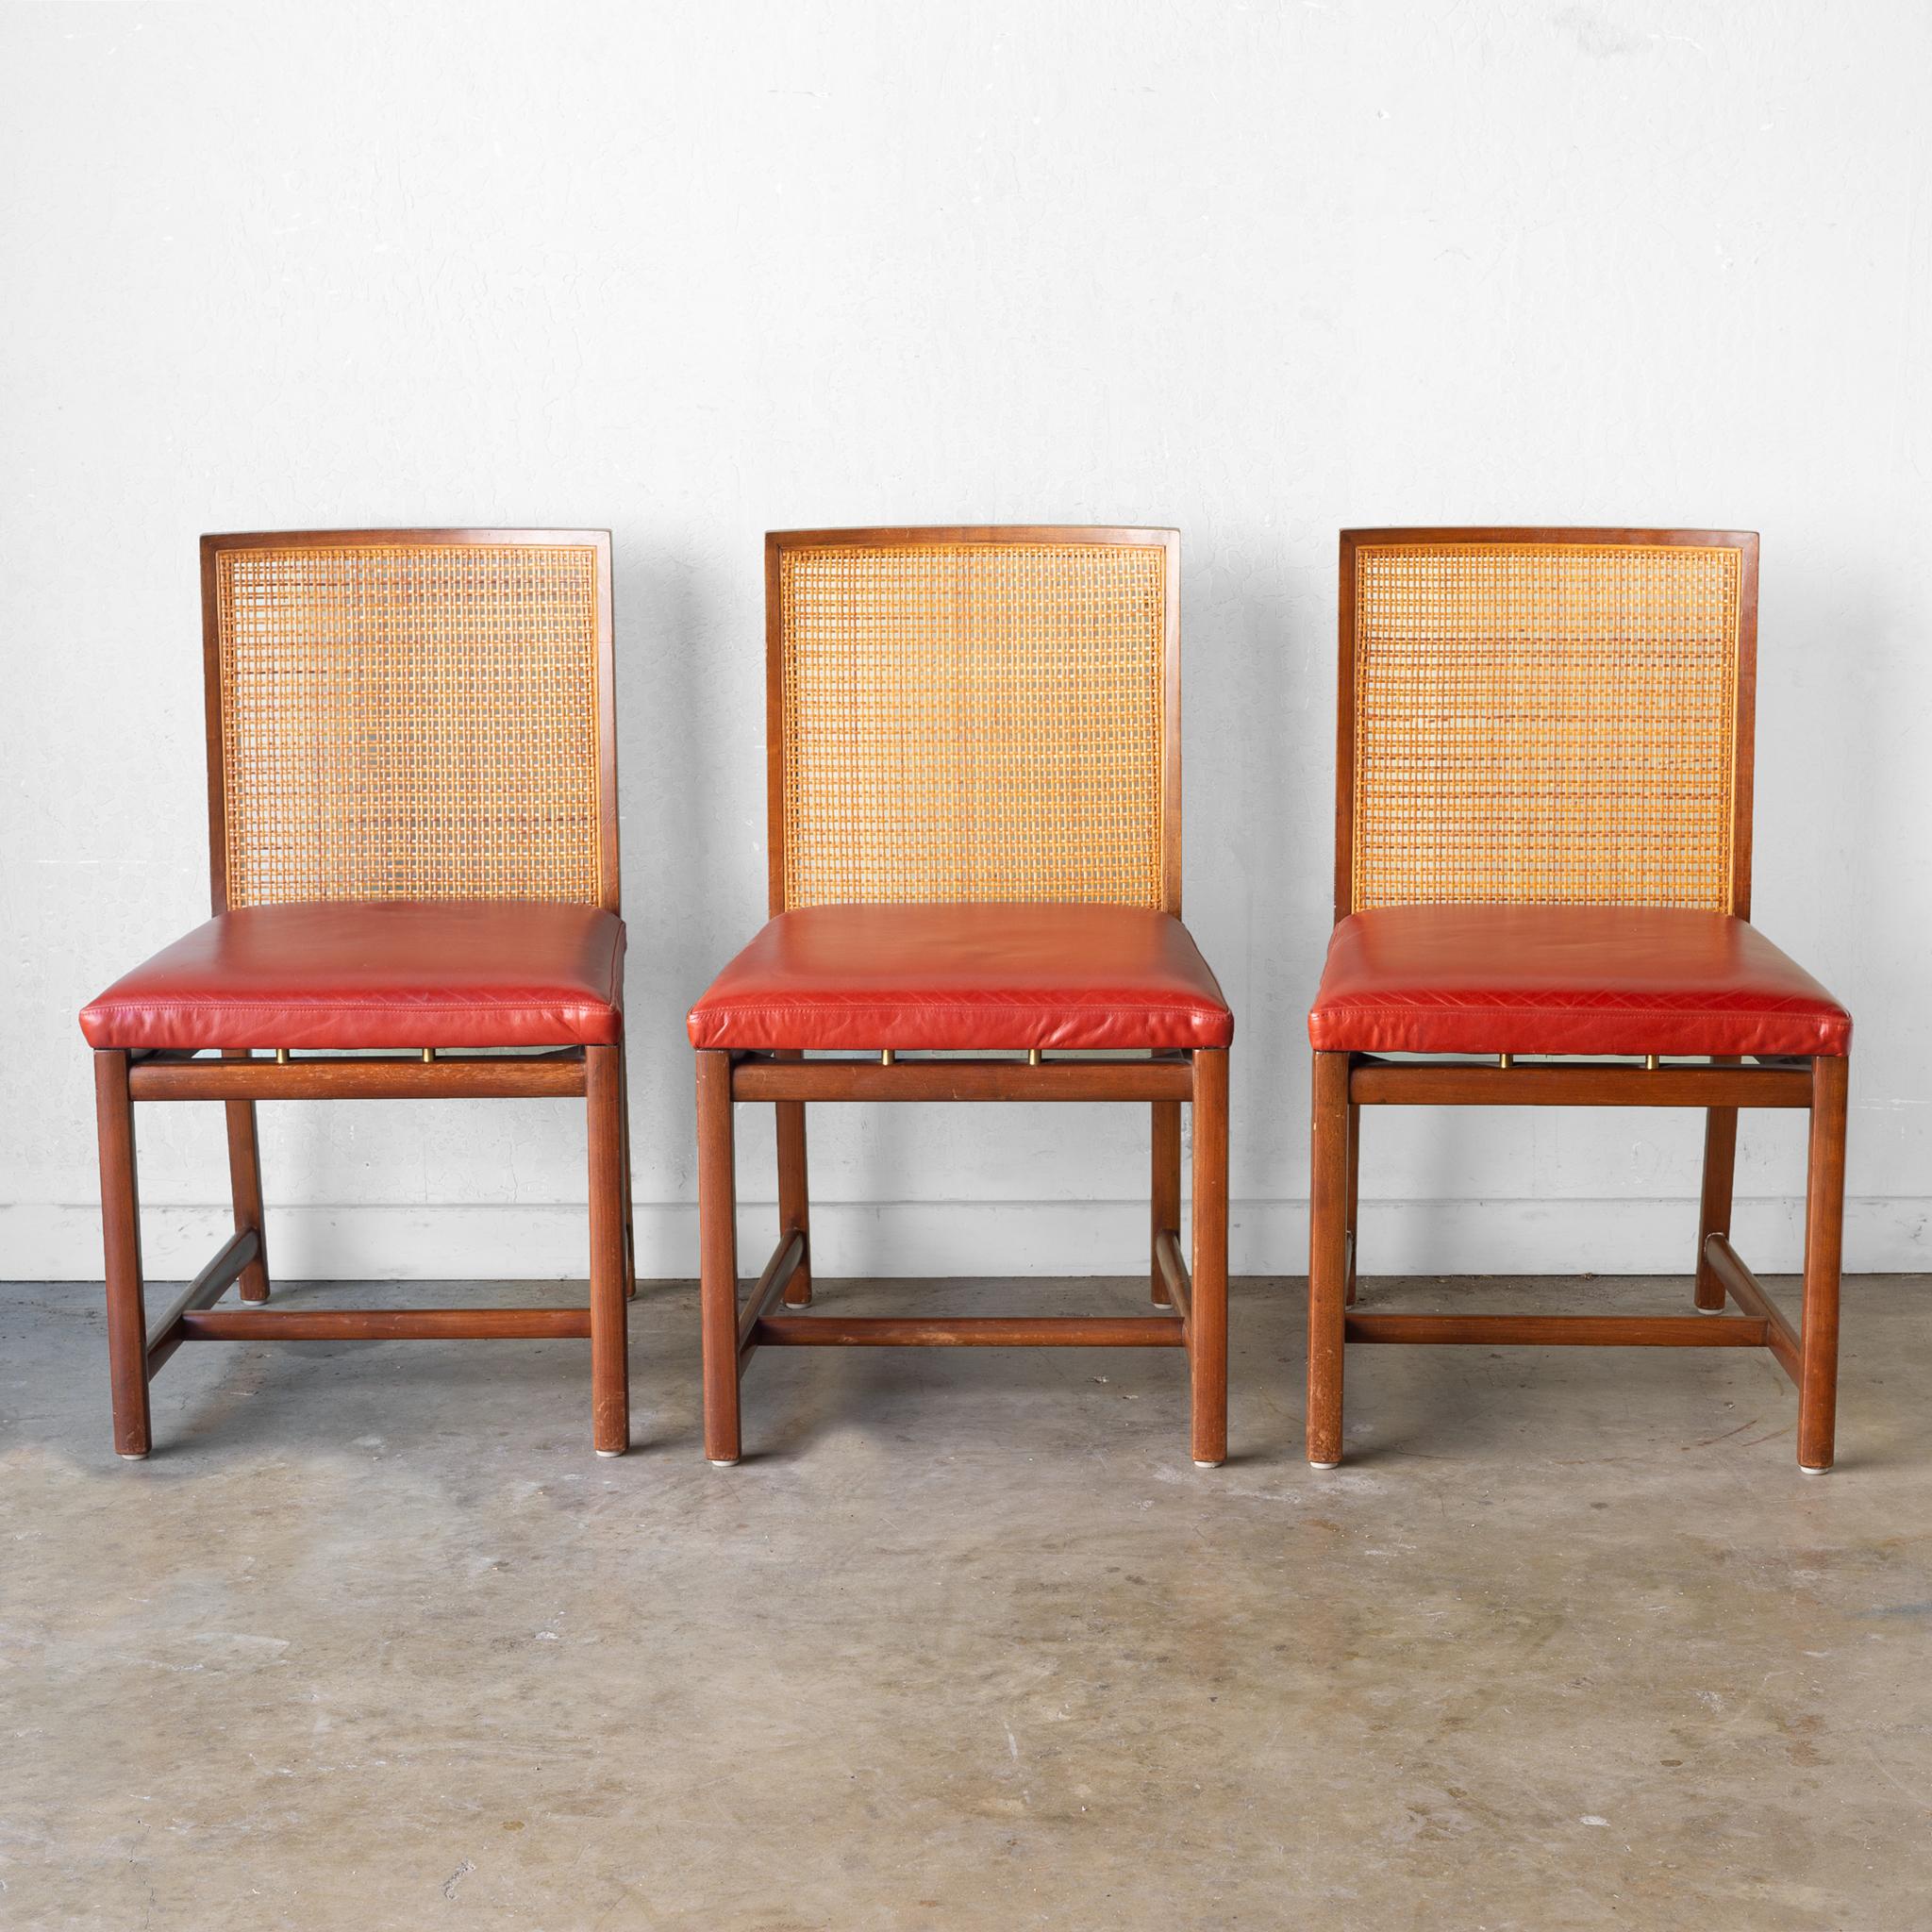 Low production series of dining chairs from the boutique New World collection by Michael Taylor for Baker, circa 1960.
Solid cherry frame with cane back detail finished in a walnut stain. Michael Taylor's signature “floating” leather seats above